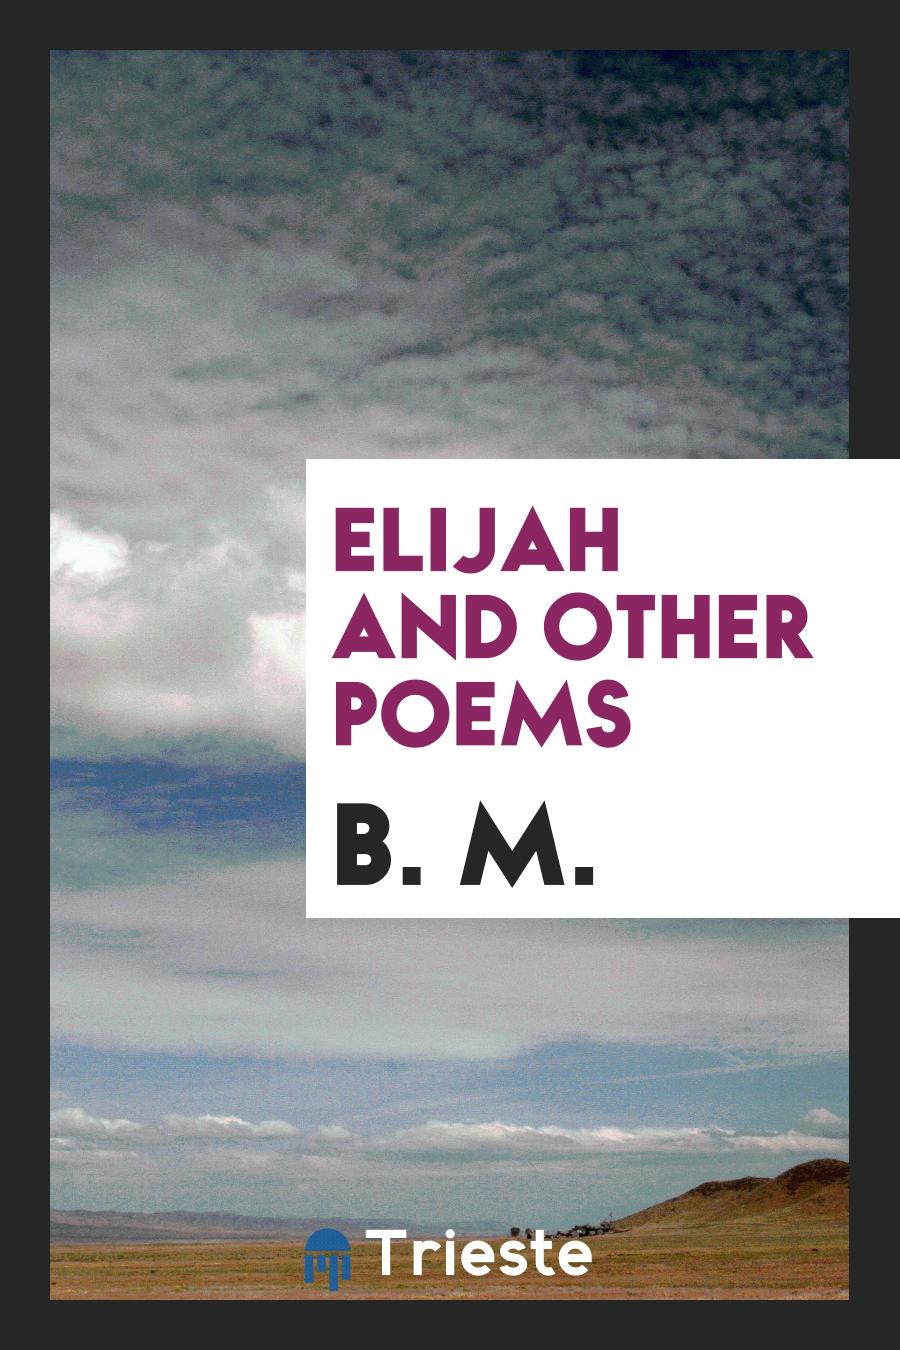 Elijah and Other Poems